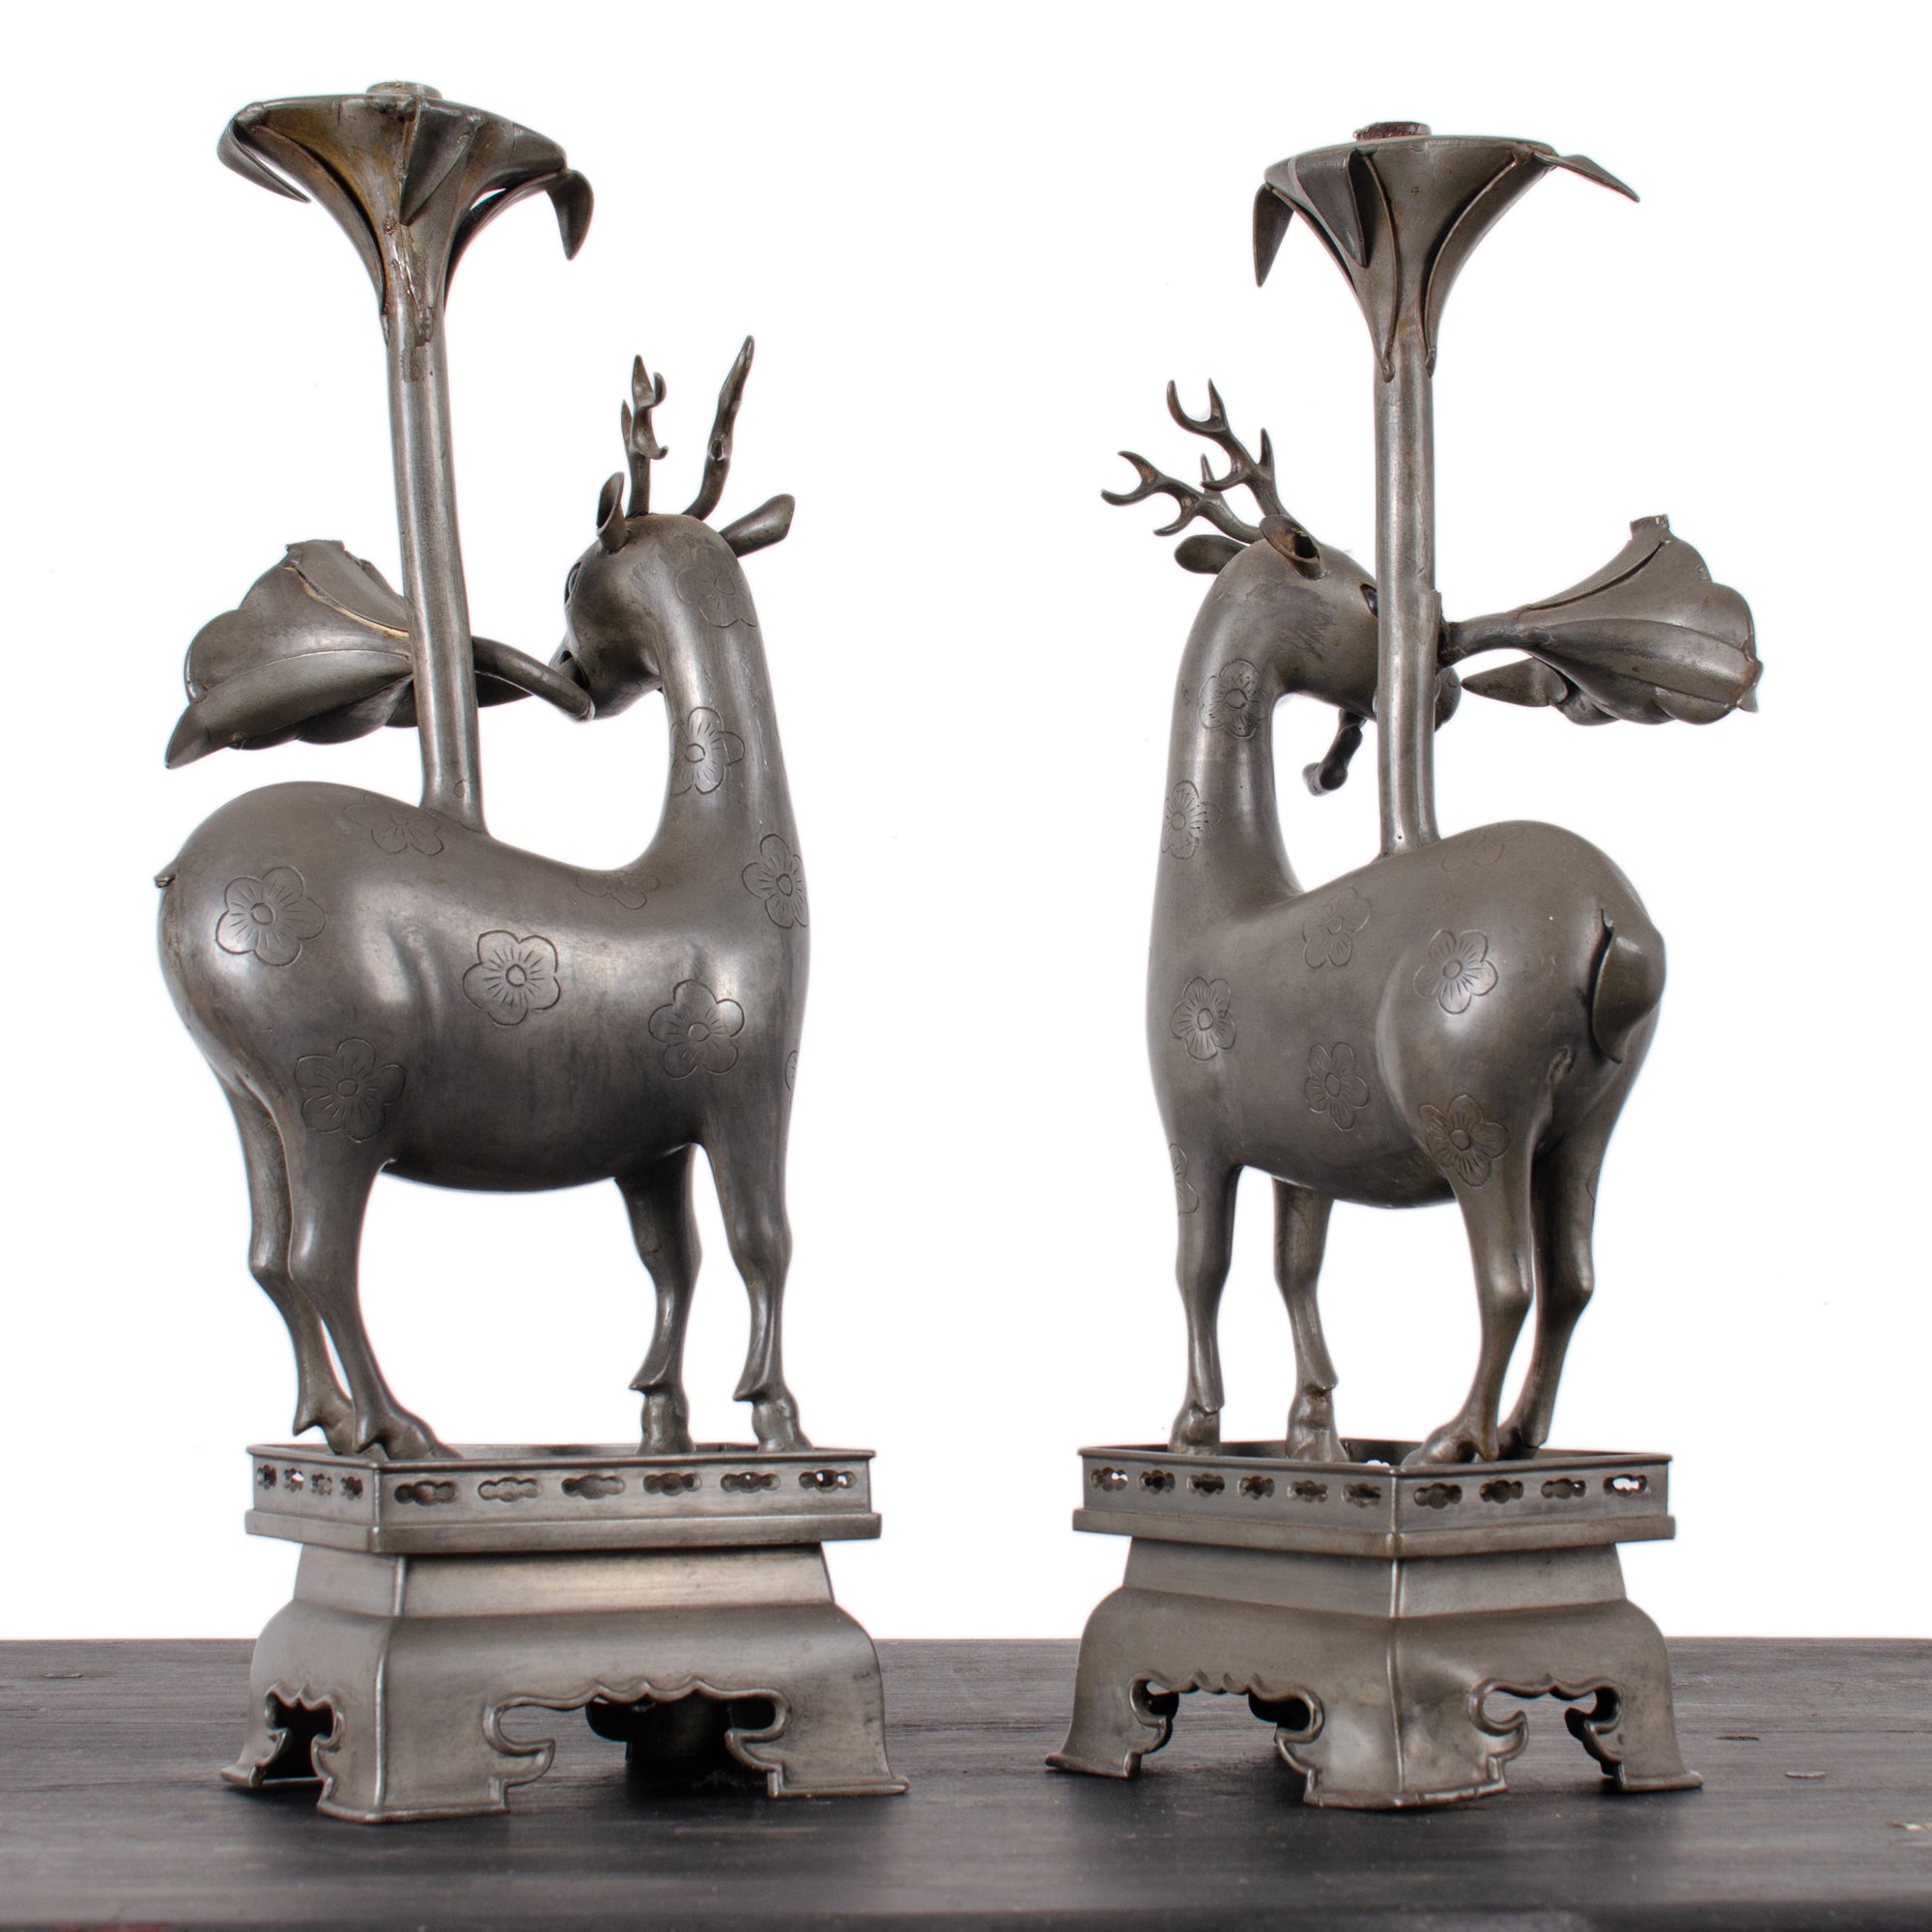 Pair of Chinese Pewter Deer-Form Candlesticks, Qing Dynasty